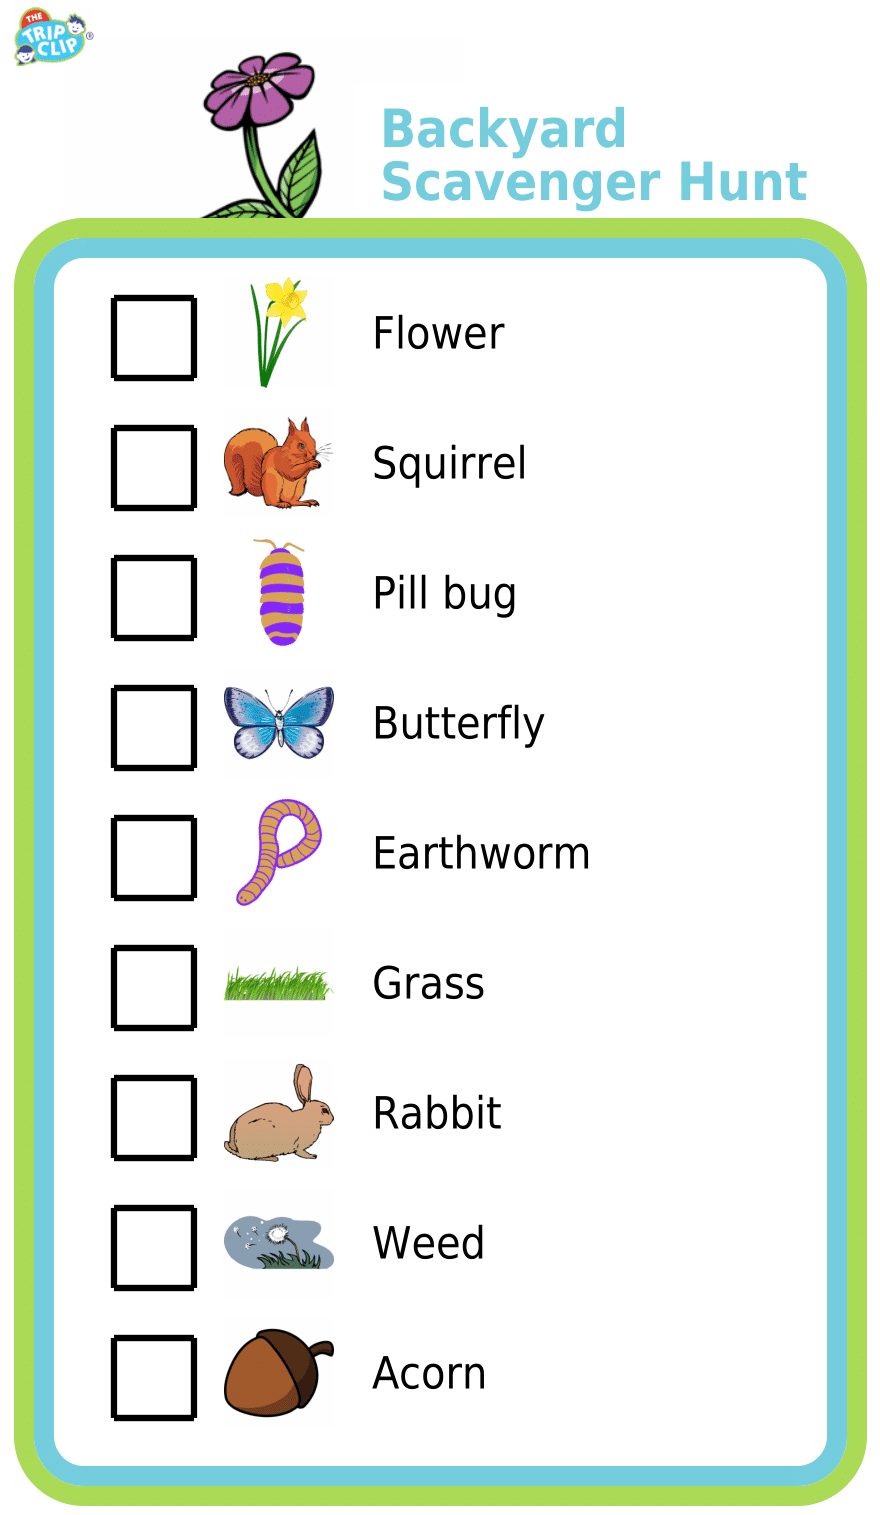 Picture checklists things for kids to find on backyard scavenger hunt